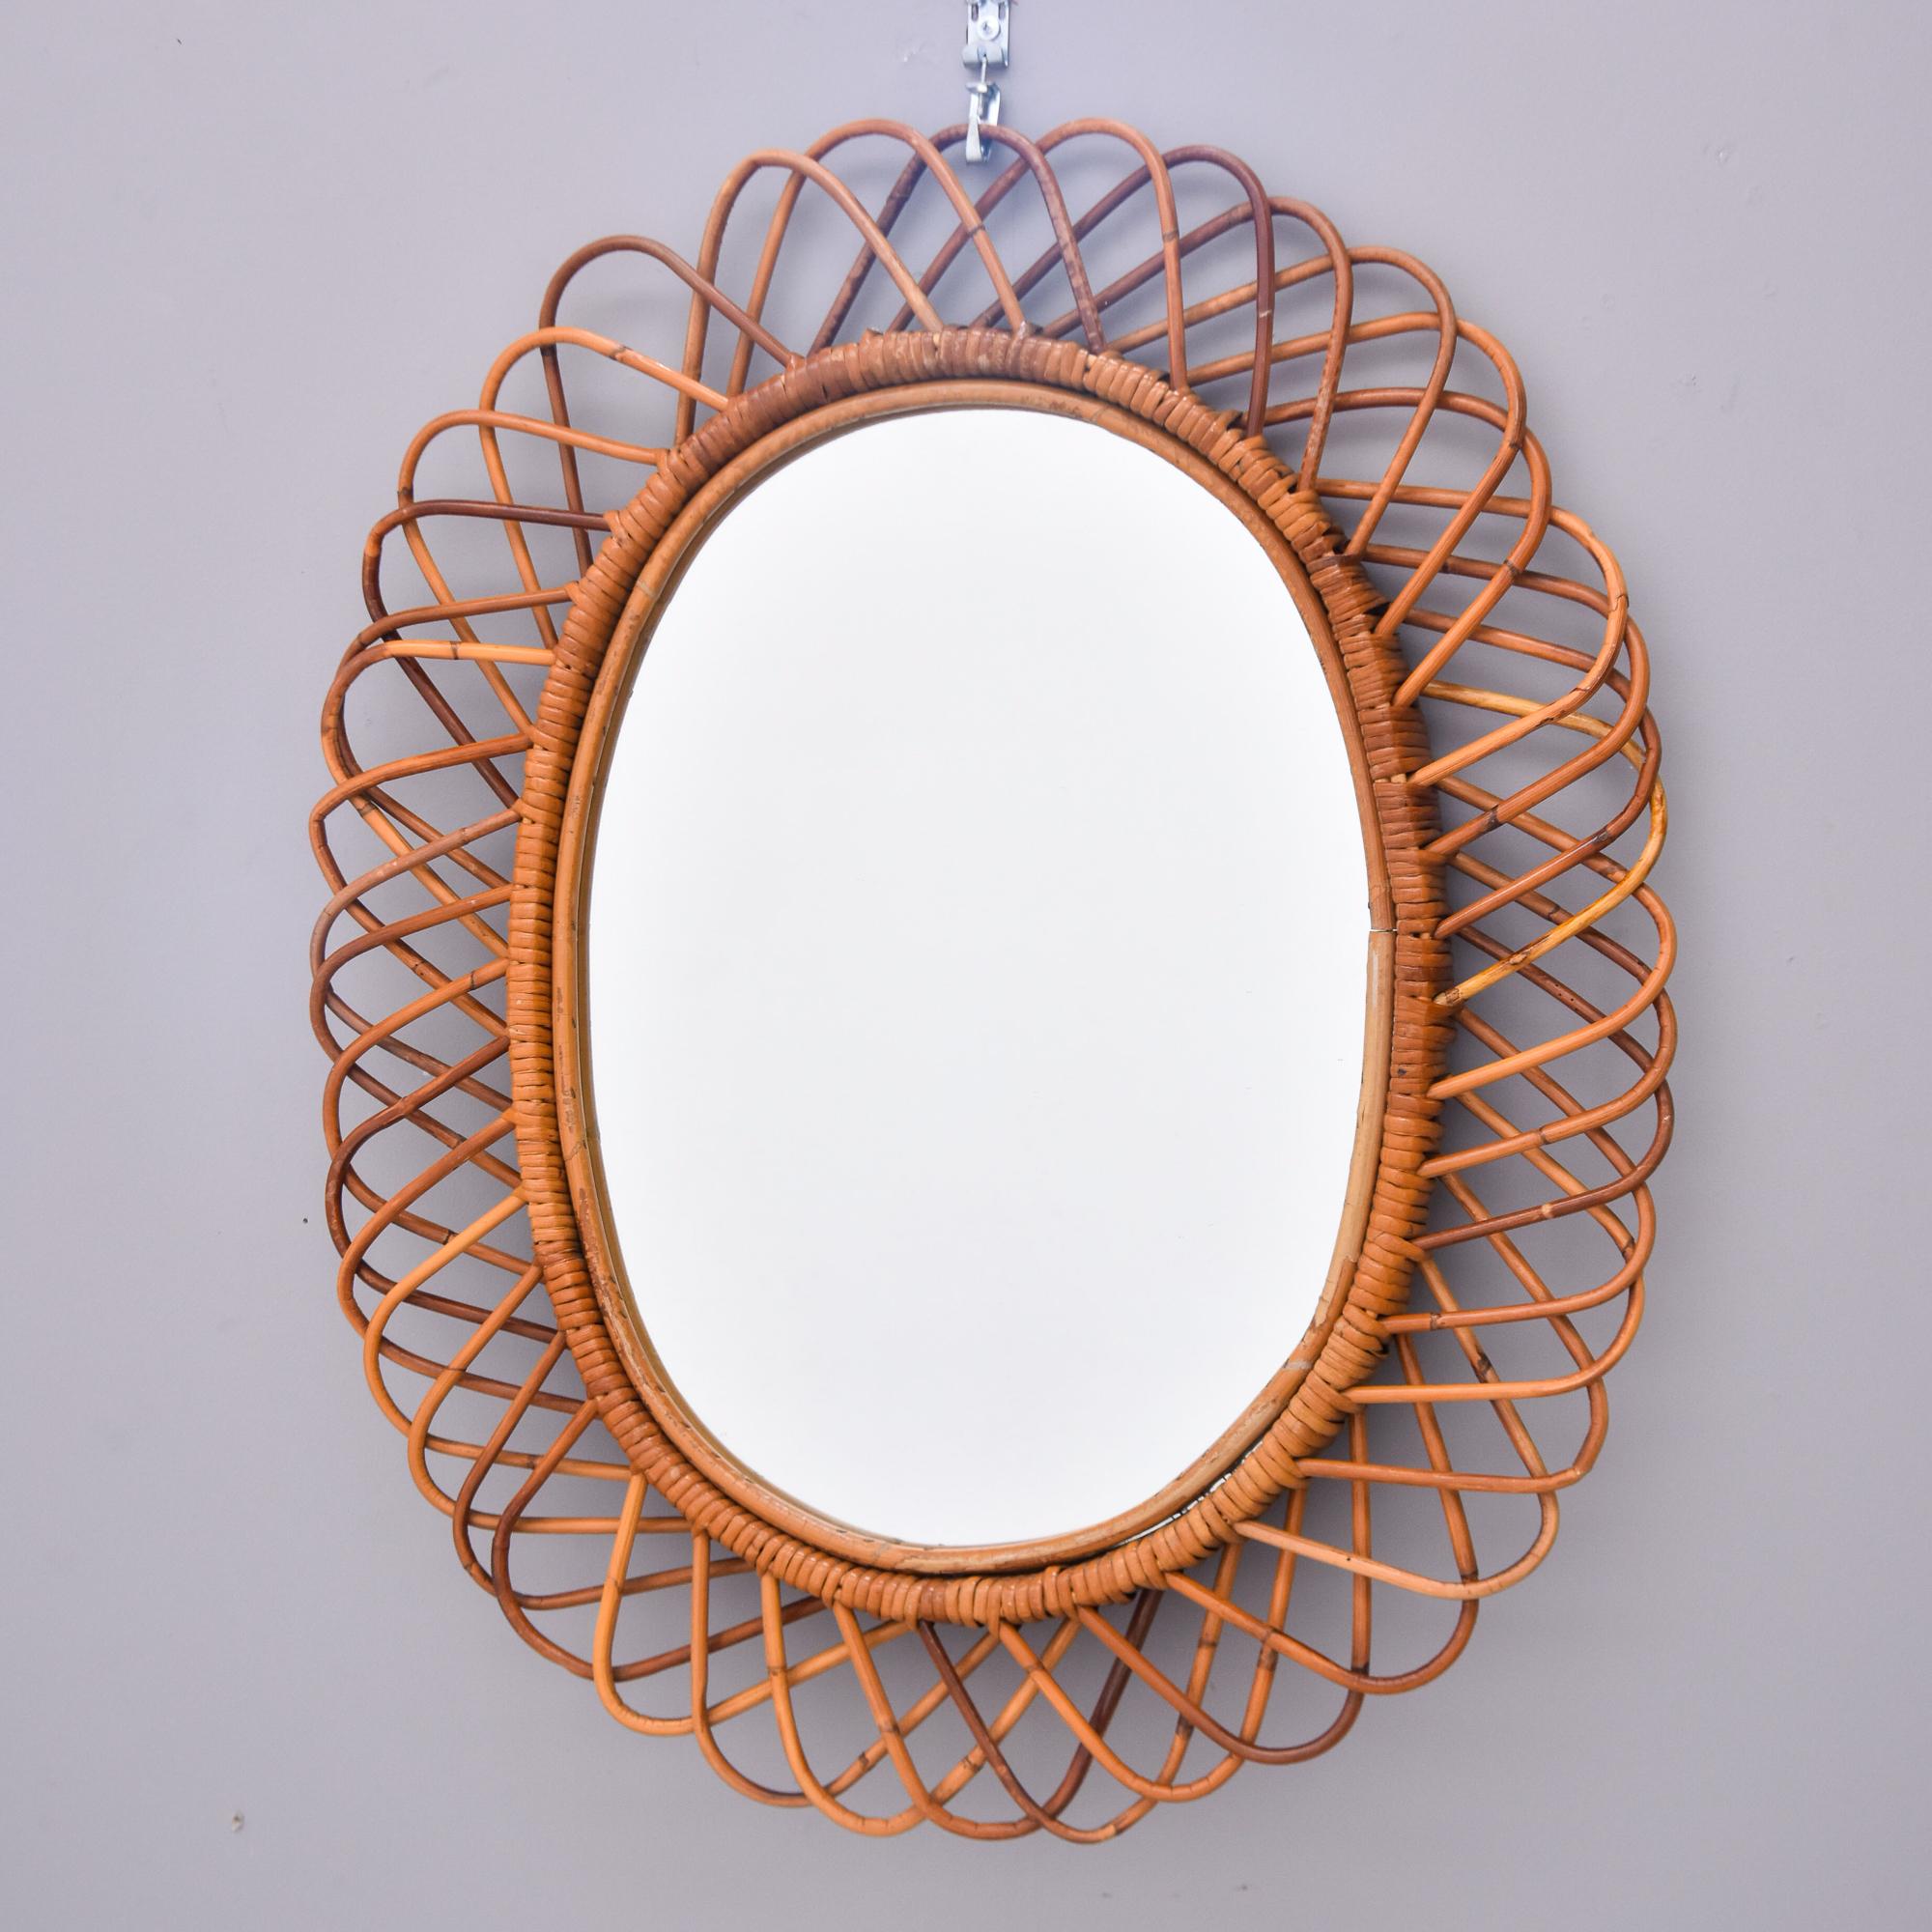 Found in Italy, this wicker framed mirror dates from approximately 1970. Oval mirror itself is 20” high by 14.5” wide and has a wide, open weave wicker or narrow reed rattan frame. Unknown maker. 

Very good vintage condition with no breaks or